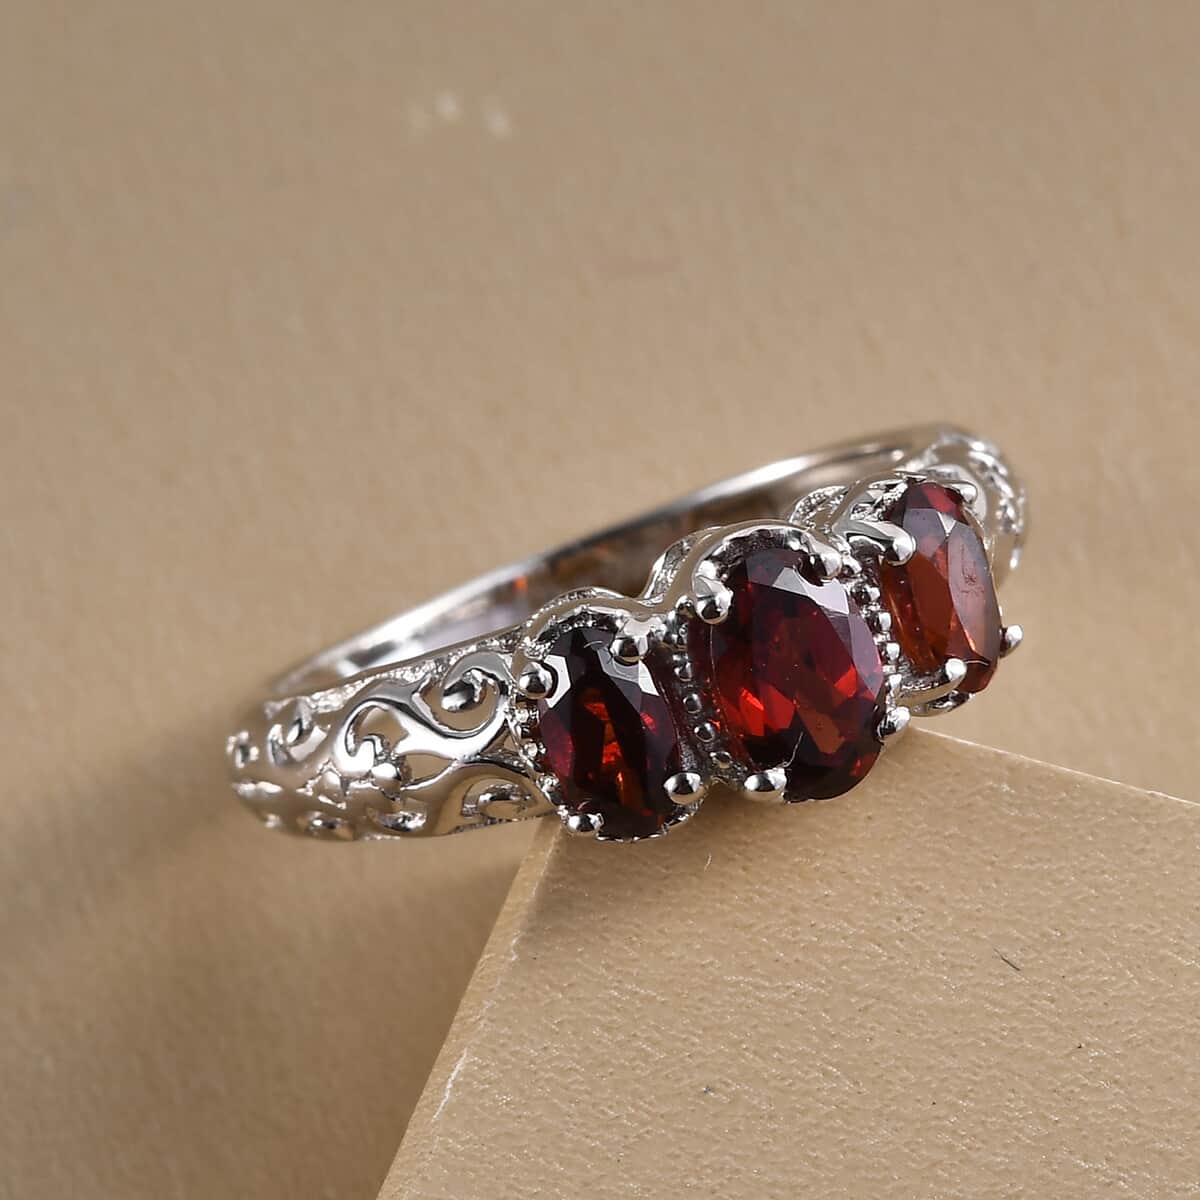 Garnet Ring, 3 Stone Garnet Ring, Trilogy Ring, Sterling Silver Ring, Birthstone Jewelry, Mozambique Garnet 3 Stone Ring 1.15 ctw (Size 5.0) image number 1